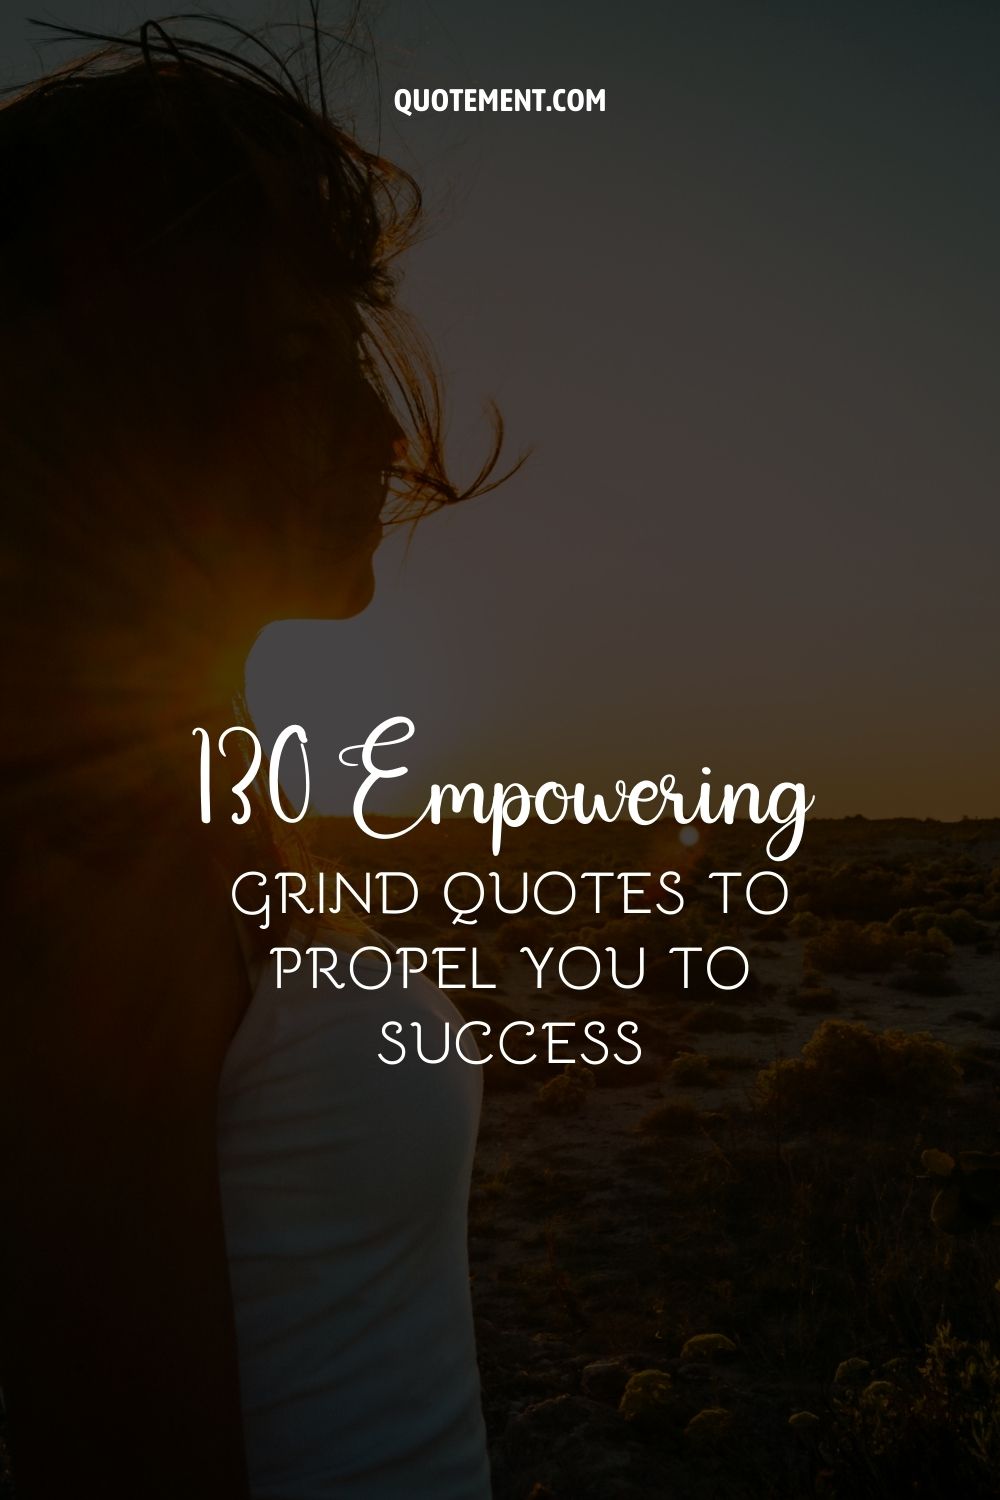 130 Empowering Grind Quotes To Propel You To Success